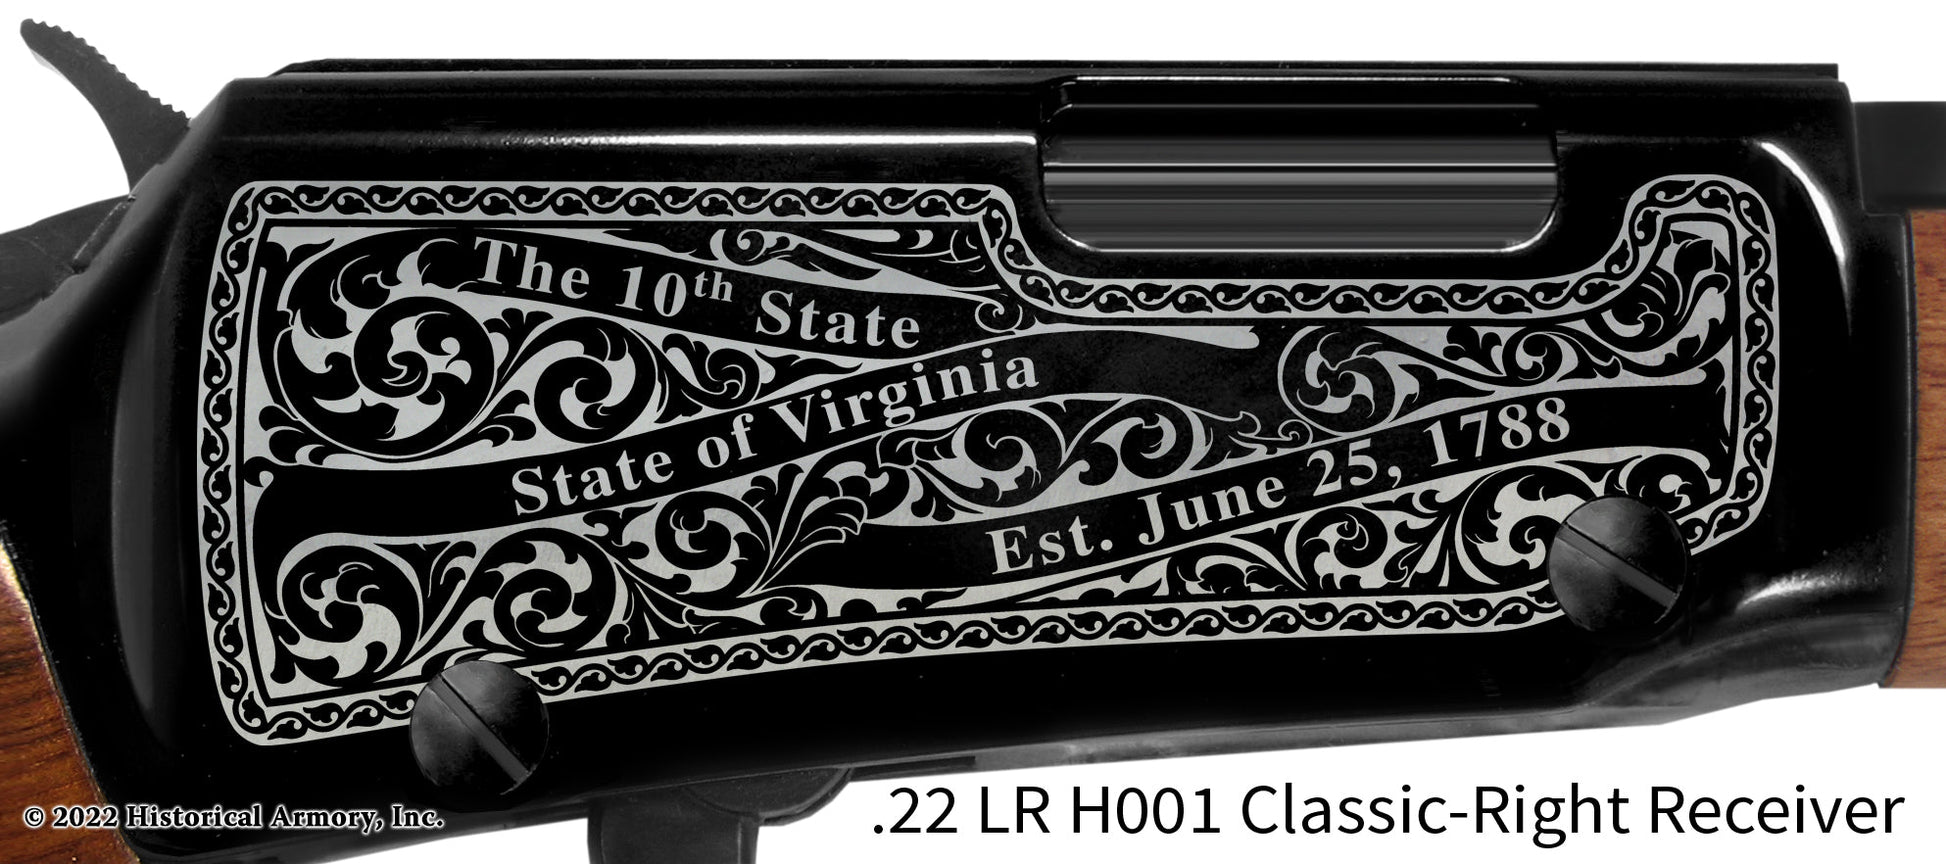 Craig County Virginia Engraved Henry H001 Rifle